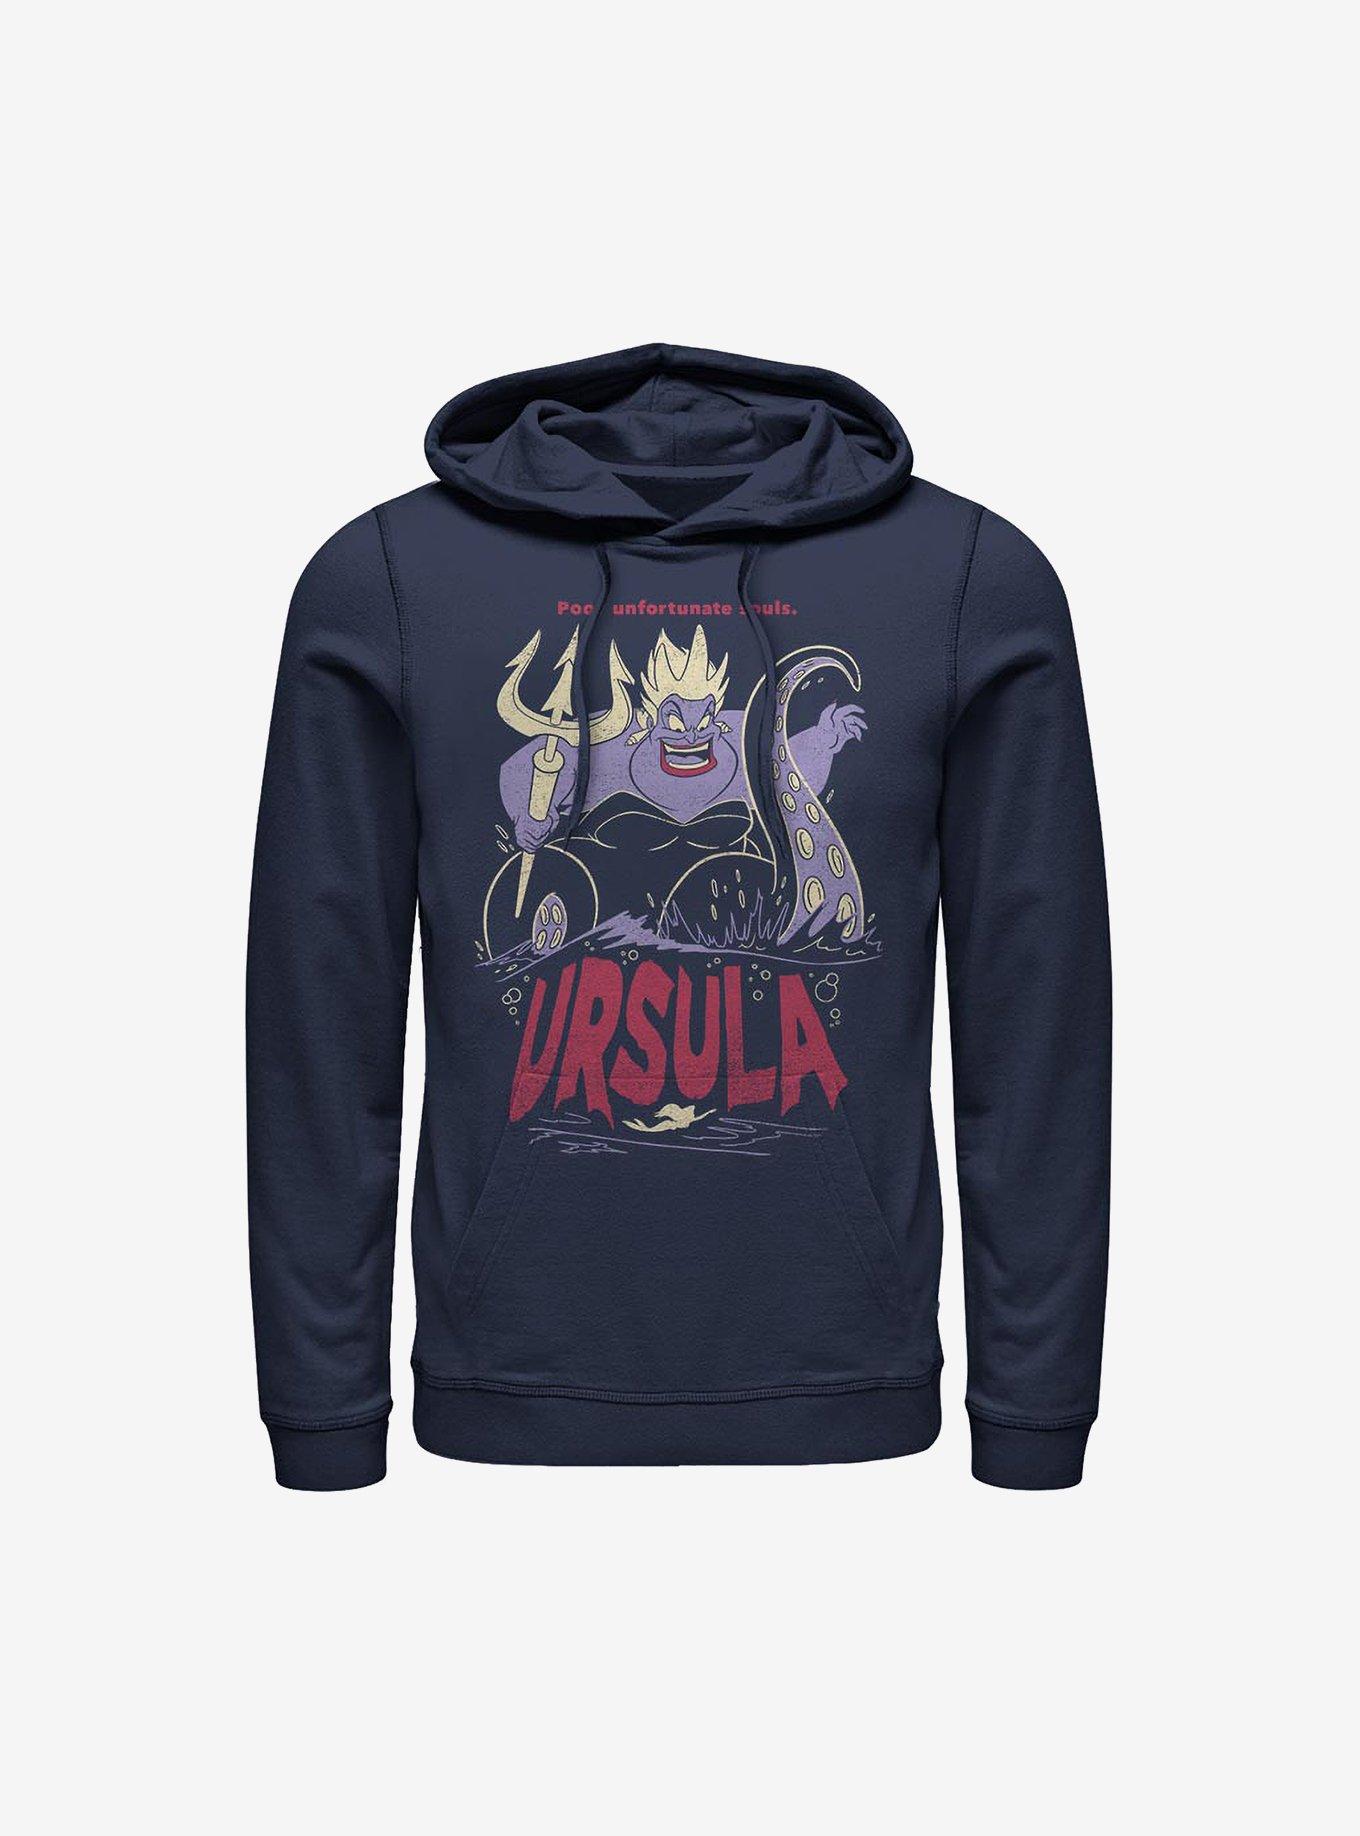 Disney The Little Mermaid Ursula The Sea Witch Hoodie, NAVY, hi-res